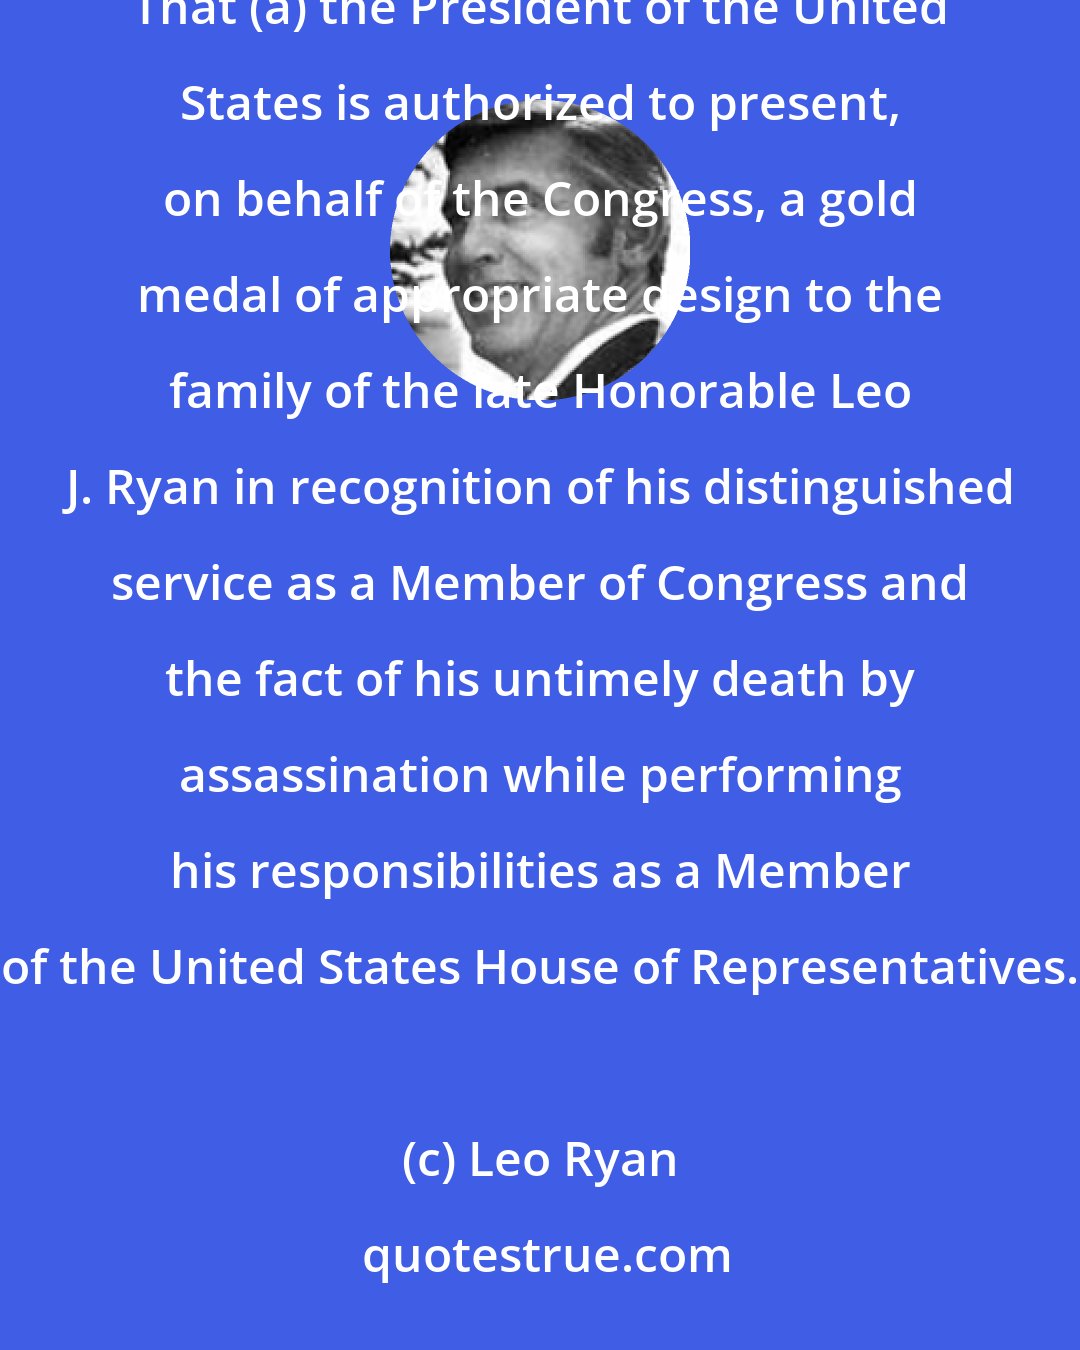 Leo Ryan: Be it enacted by the Senate and House of Representatives of the United States of America in Congress assembled, That (a) the President of the United States is authorized to present, on behalf of the Congress, a gold medal of appropriate design to the family of the late Honorable Leo J. Ryan in recognition of his distinguished service as a Member of Congress and the fact of his untimely death by assassination while performing his responsibilities as a Member of the United States House of Representatives.